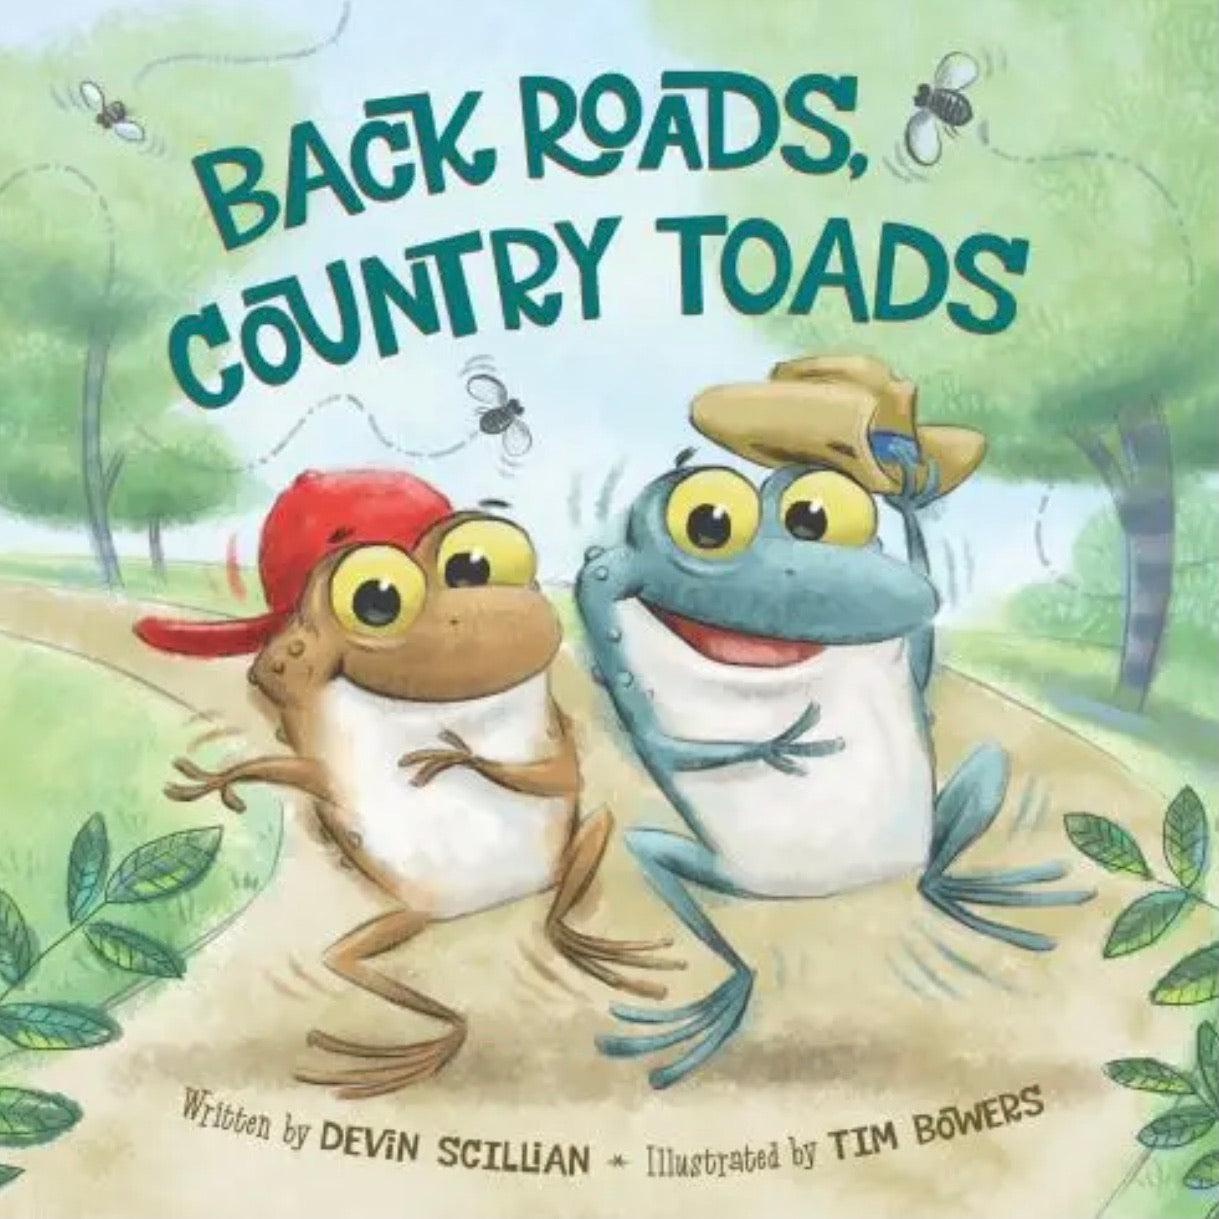 Backroads, Country Toads